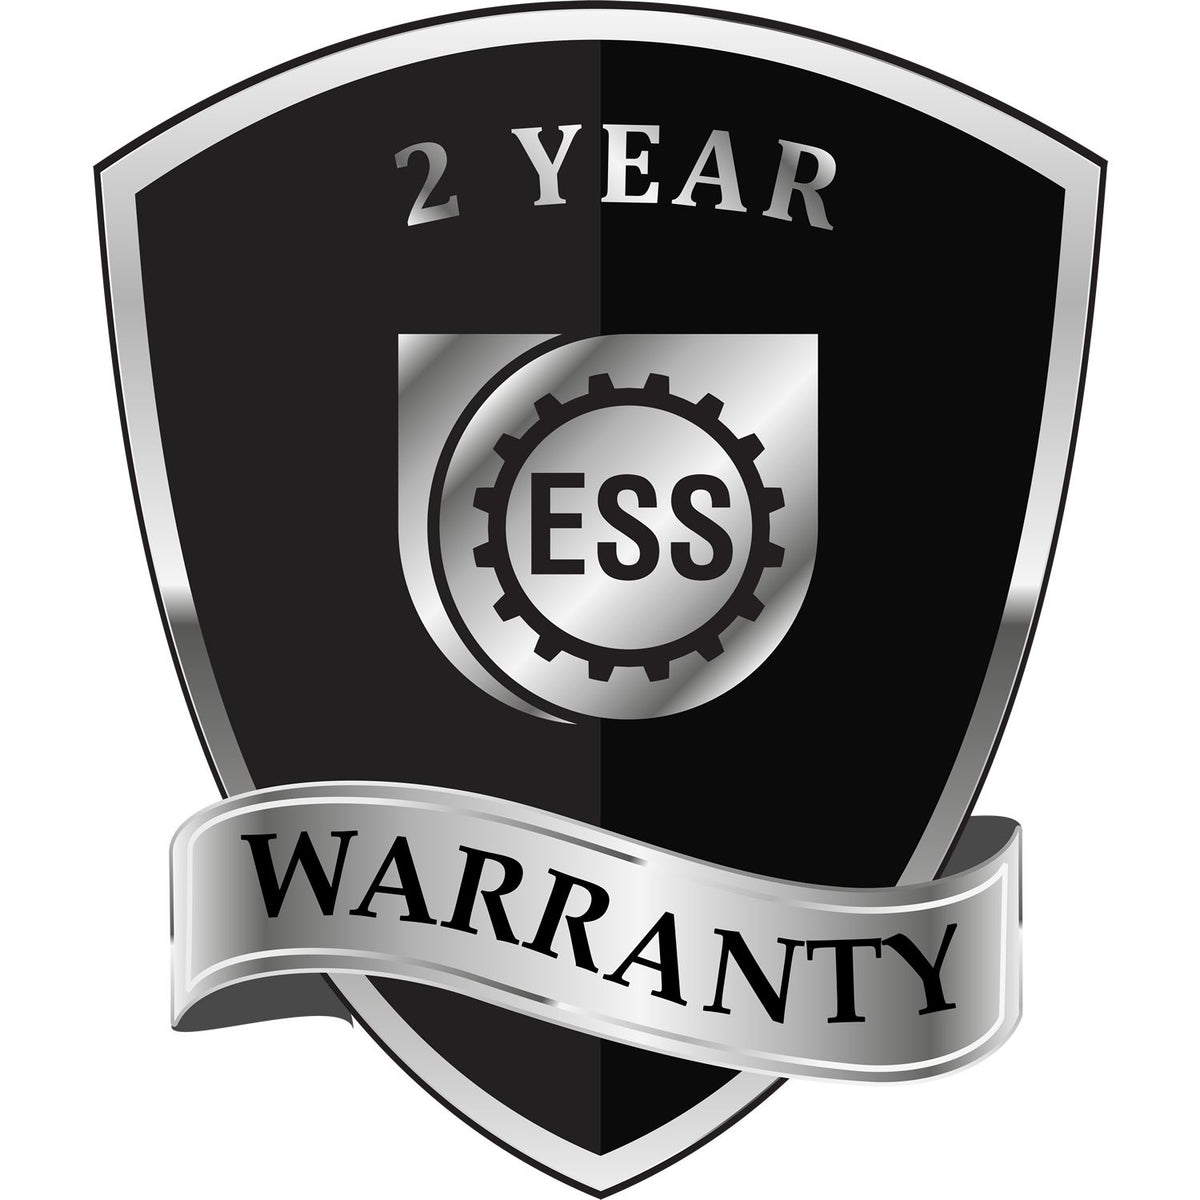 A badge or emblem showing a warranty icon for the Oklahoma Engineer Desk Seal